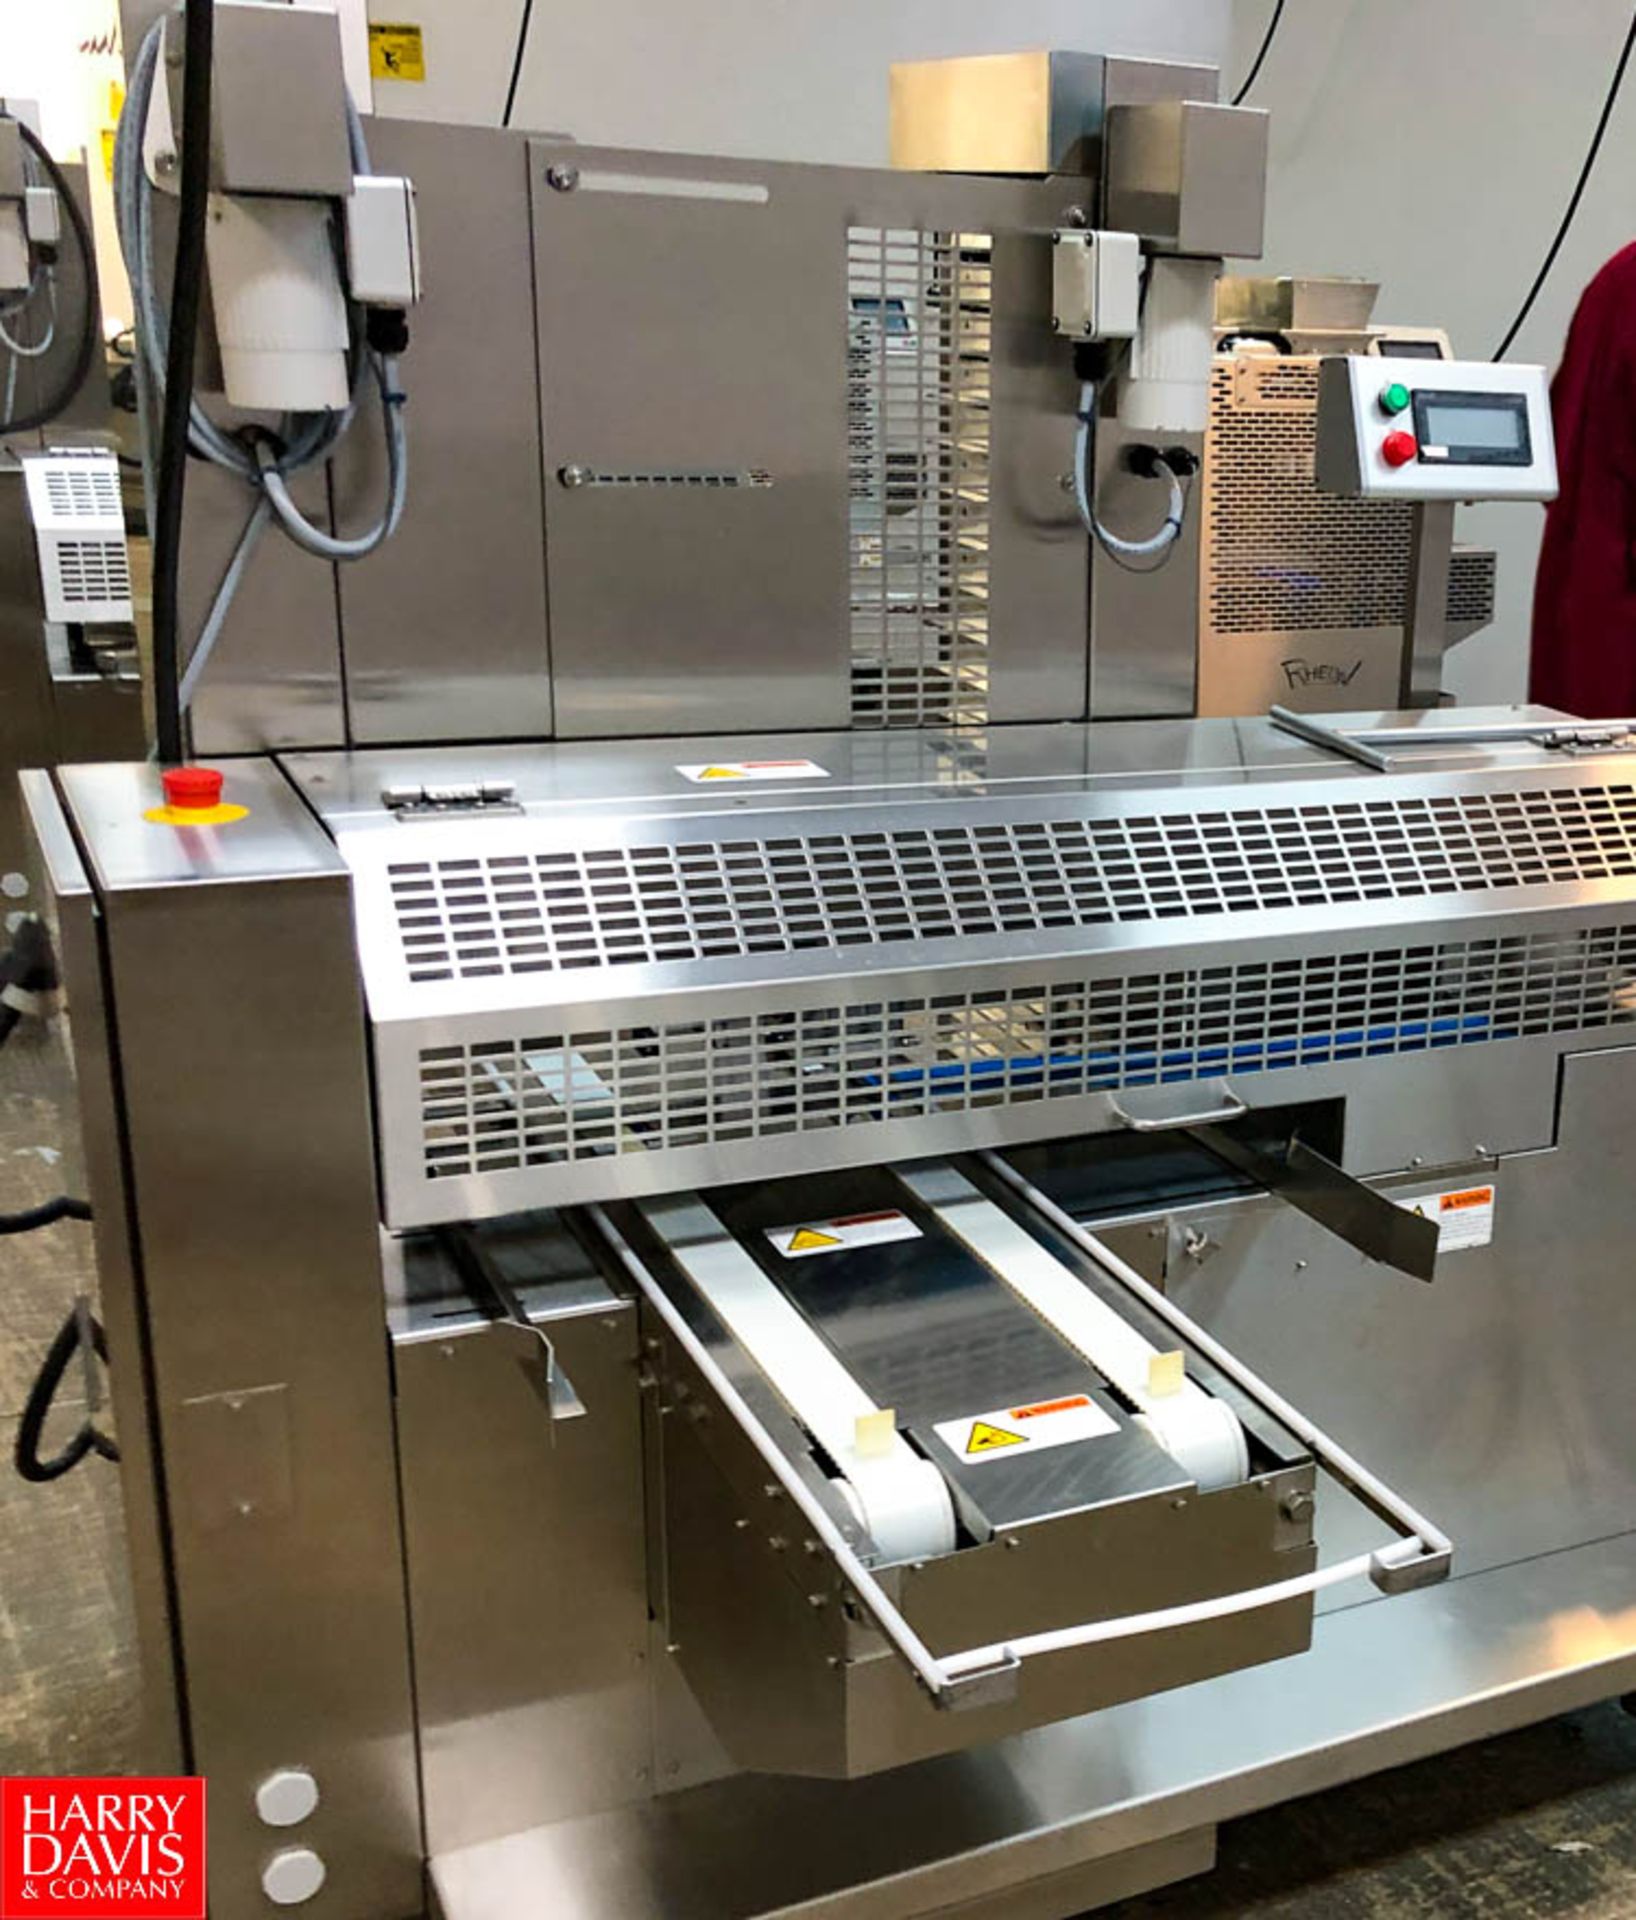 2019 Rheon Set Panner KP302; Tray Size: 660 mm, Up to 60 pcs/min, S/N: 00233 With Belting Rigging - Image 3 of 5